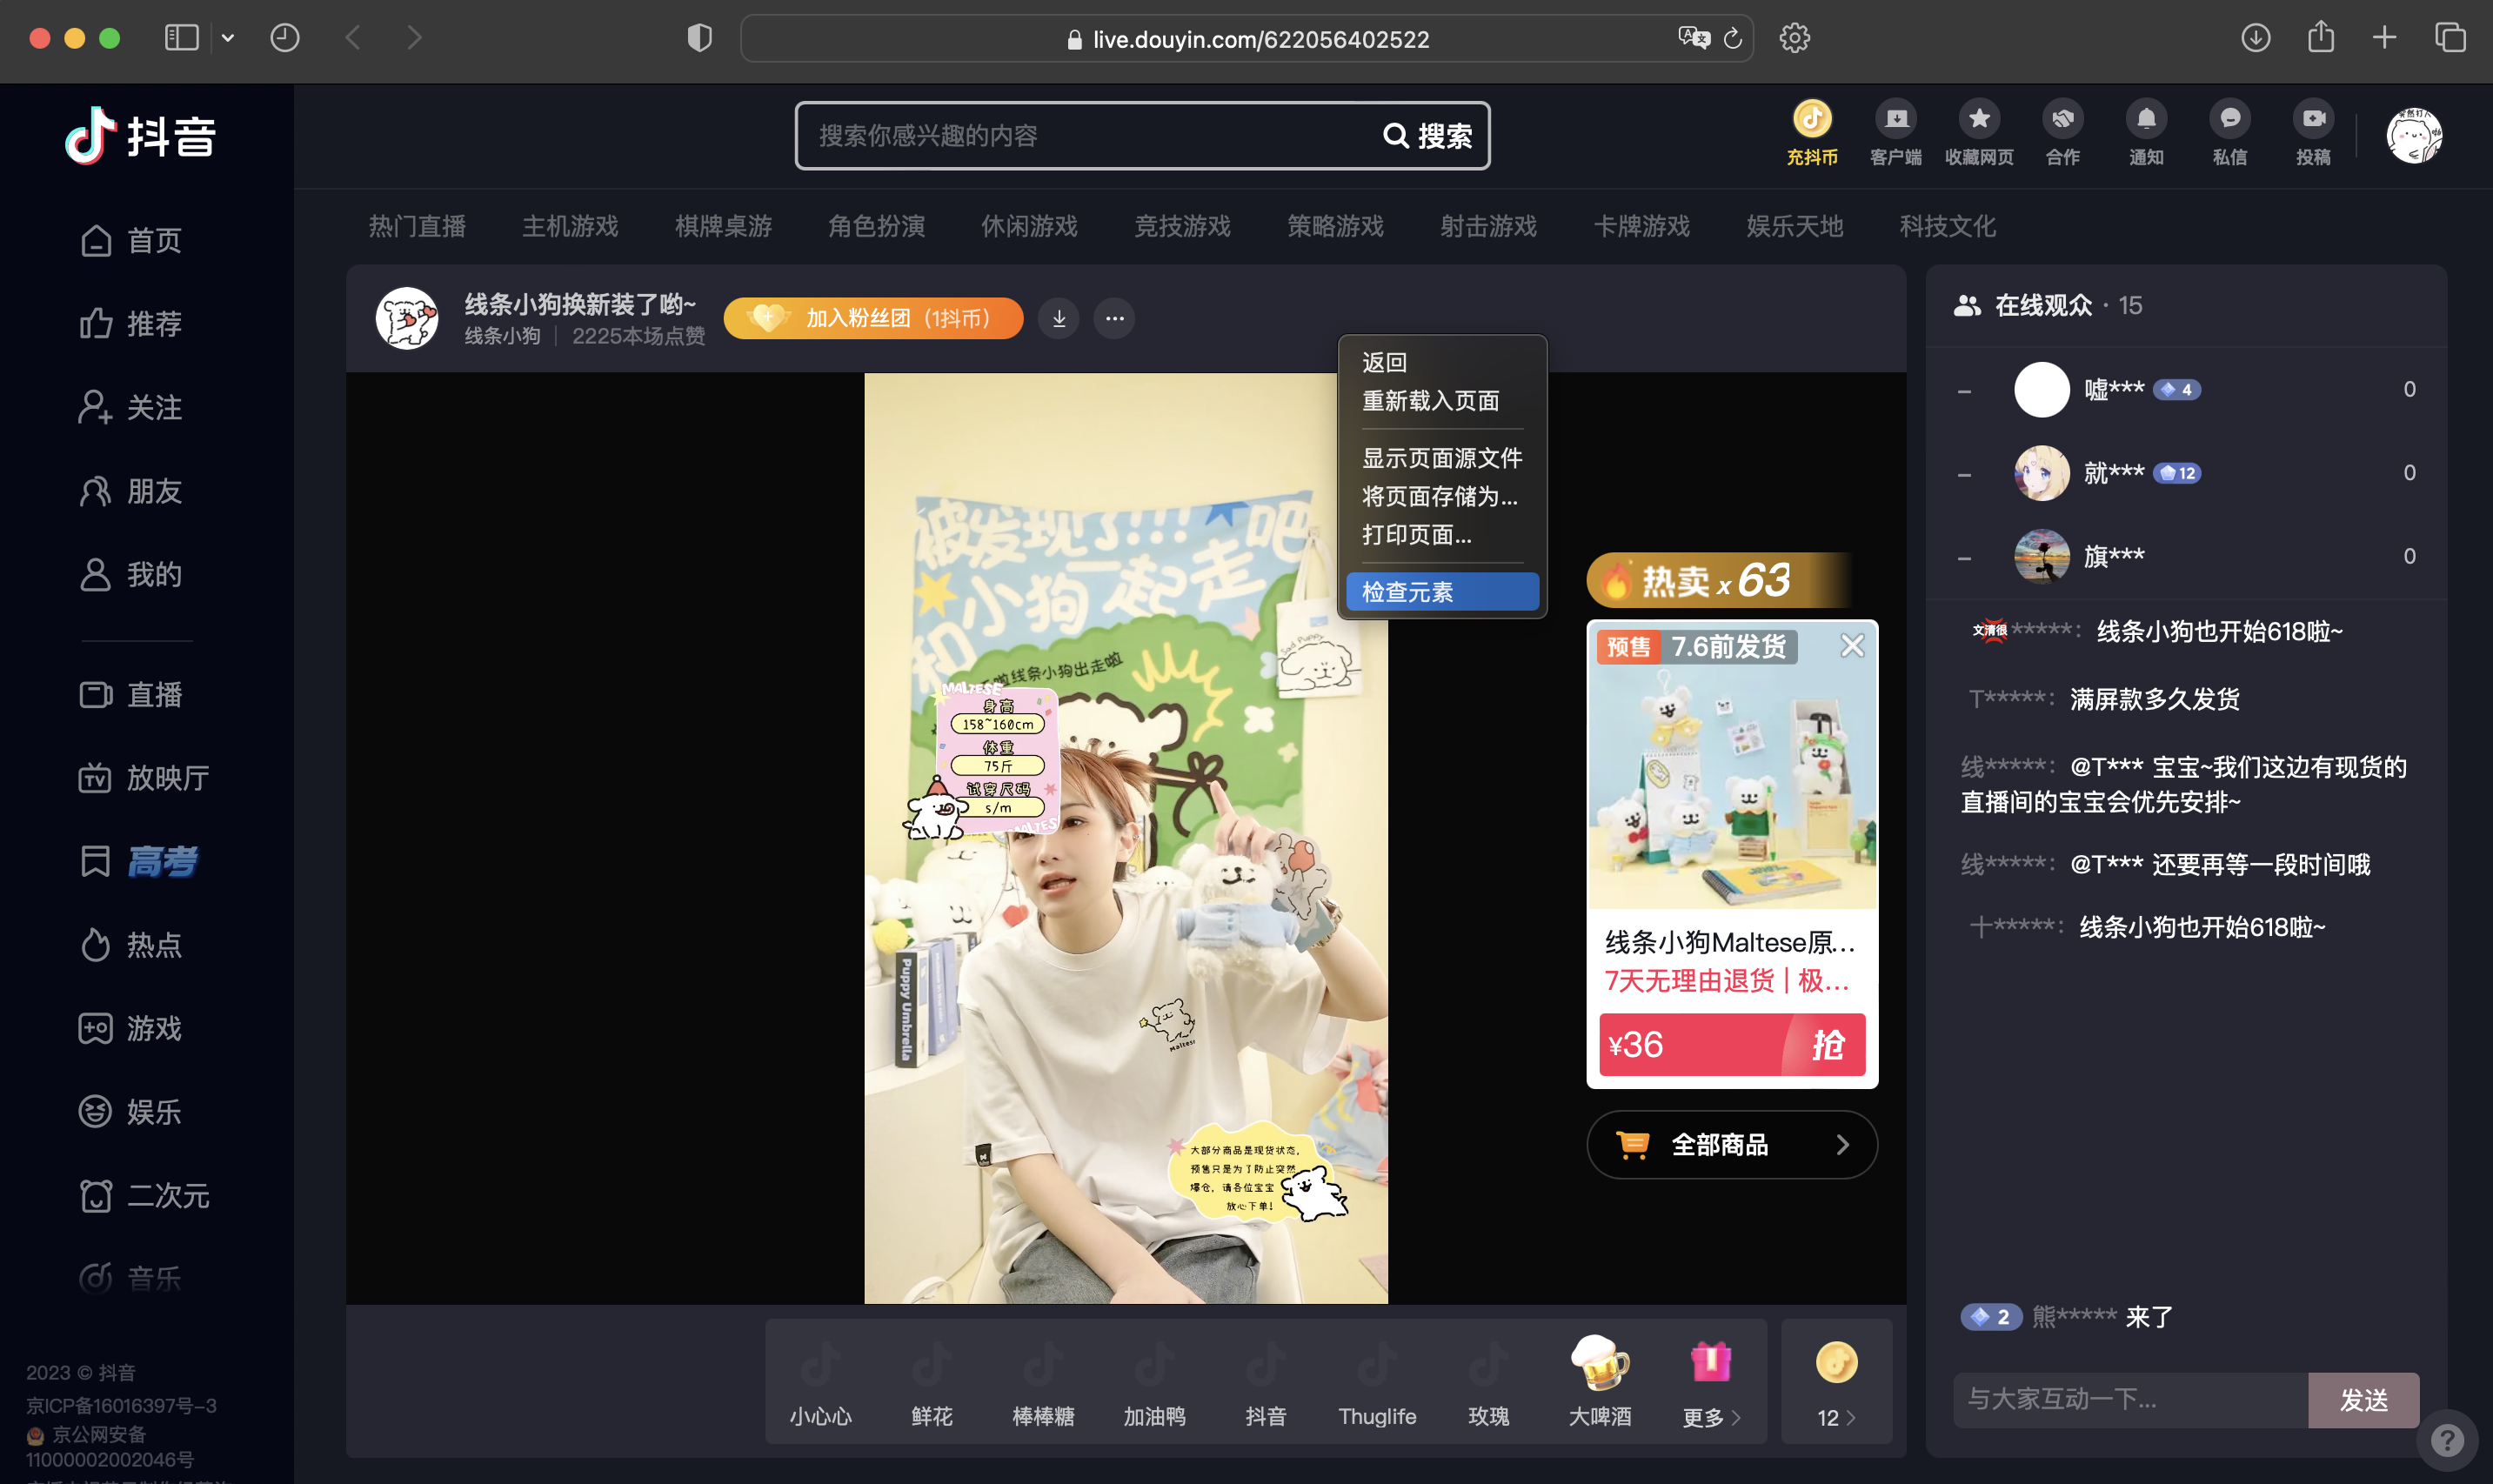 Open the Douyin live broadcast room you want to record, right-click a blank area of the web page, and click "View Elements"